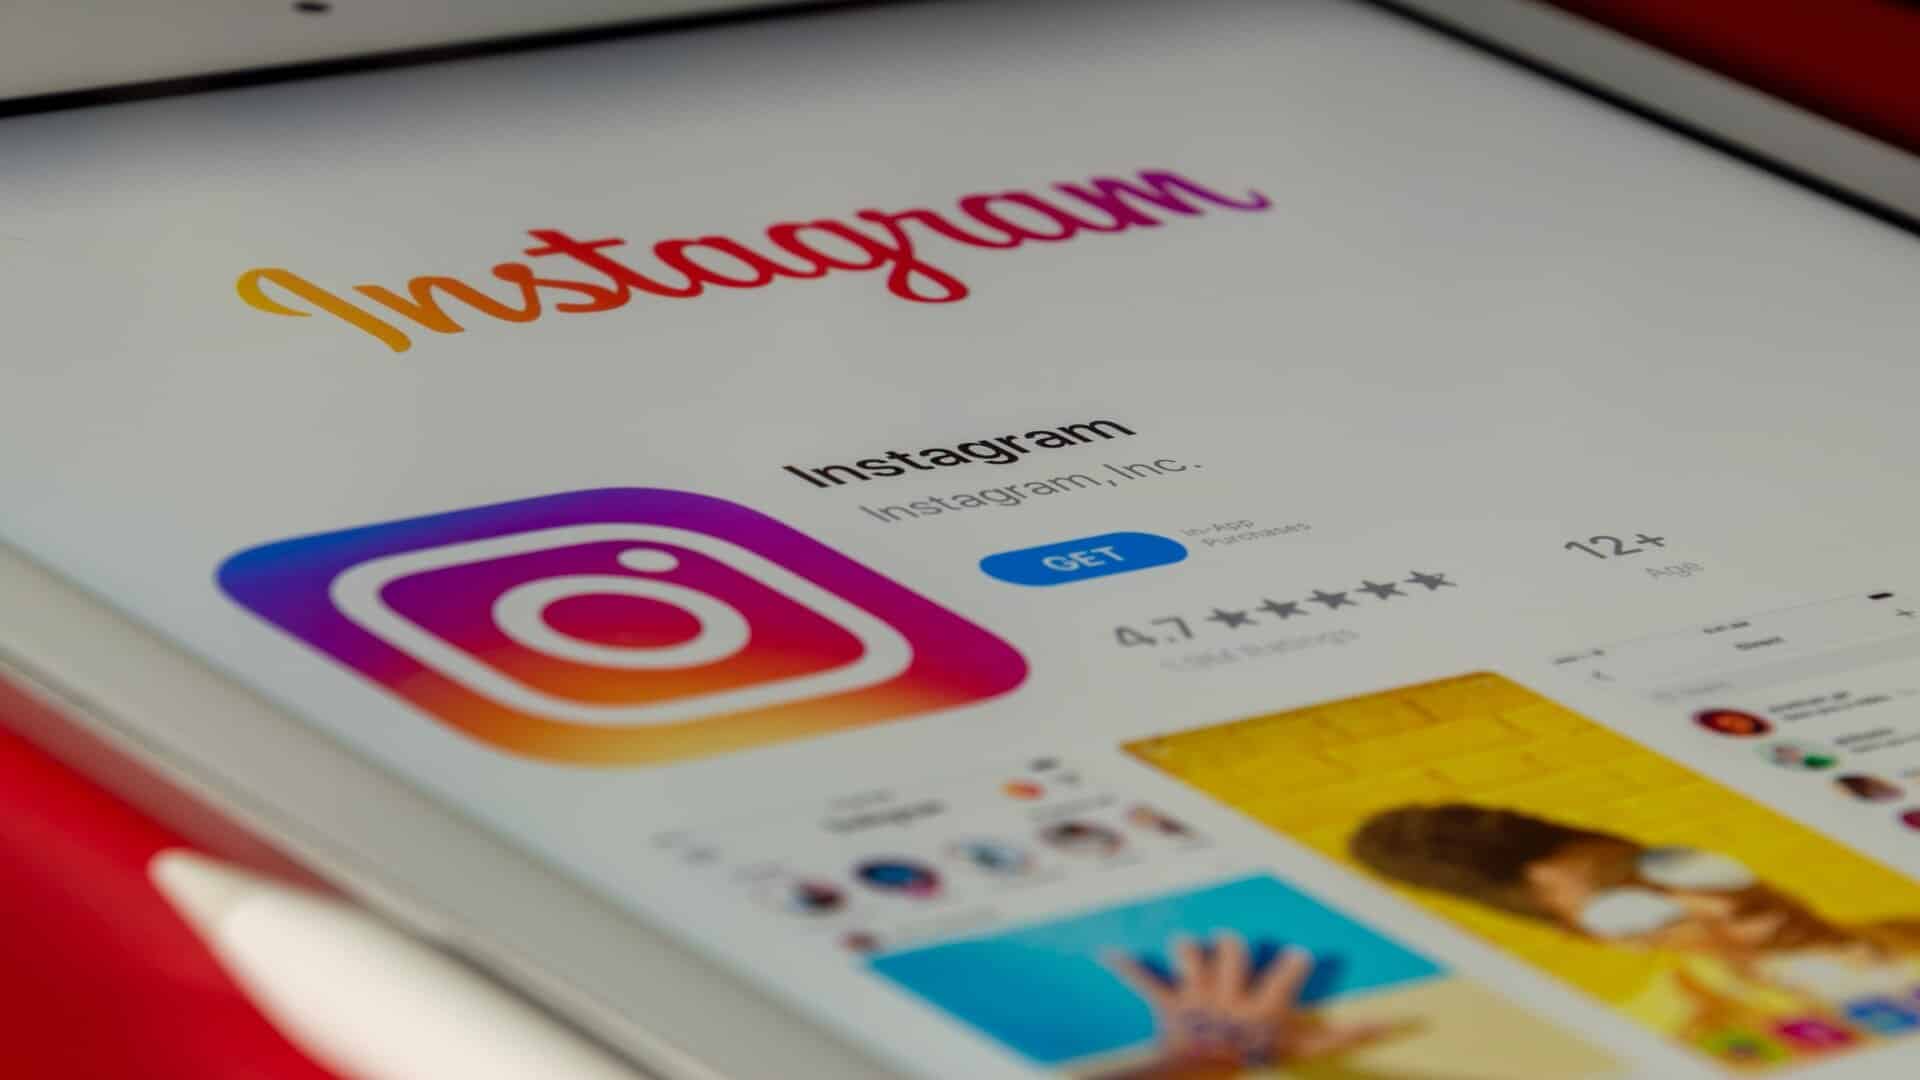 Not accurate to say research demonstrates Instagram is “toxic” for teen girls: Facebook